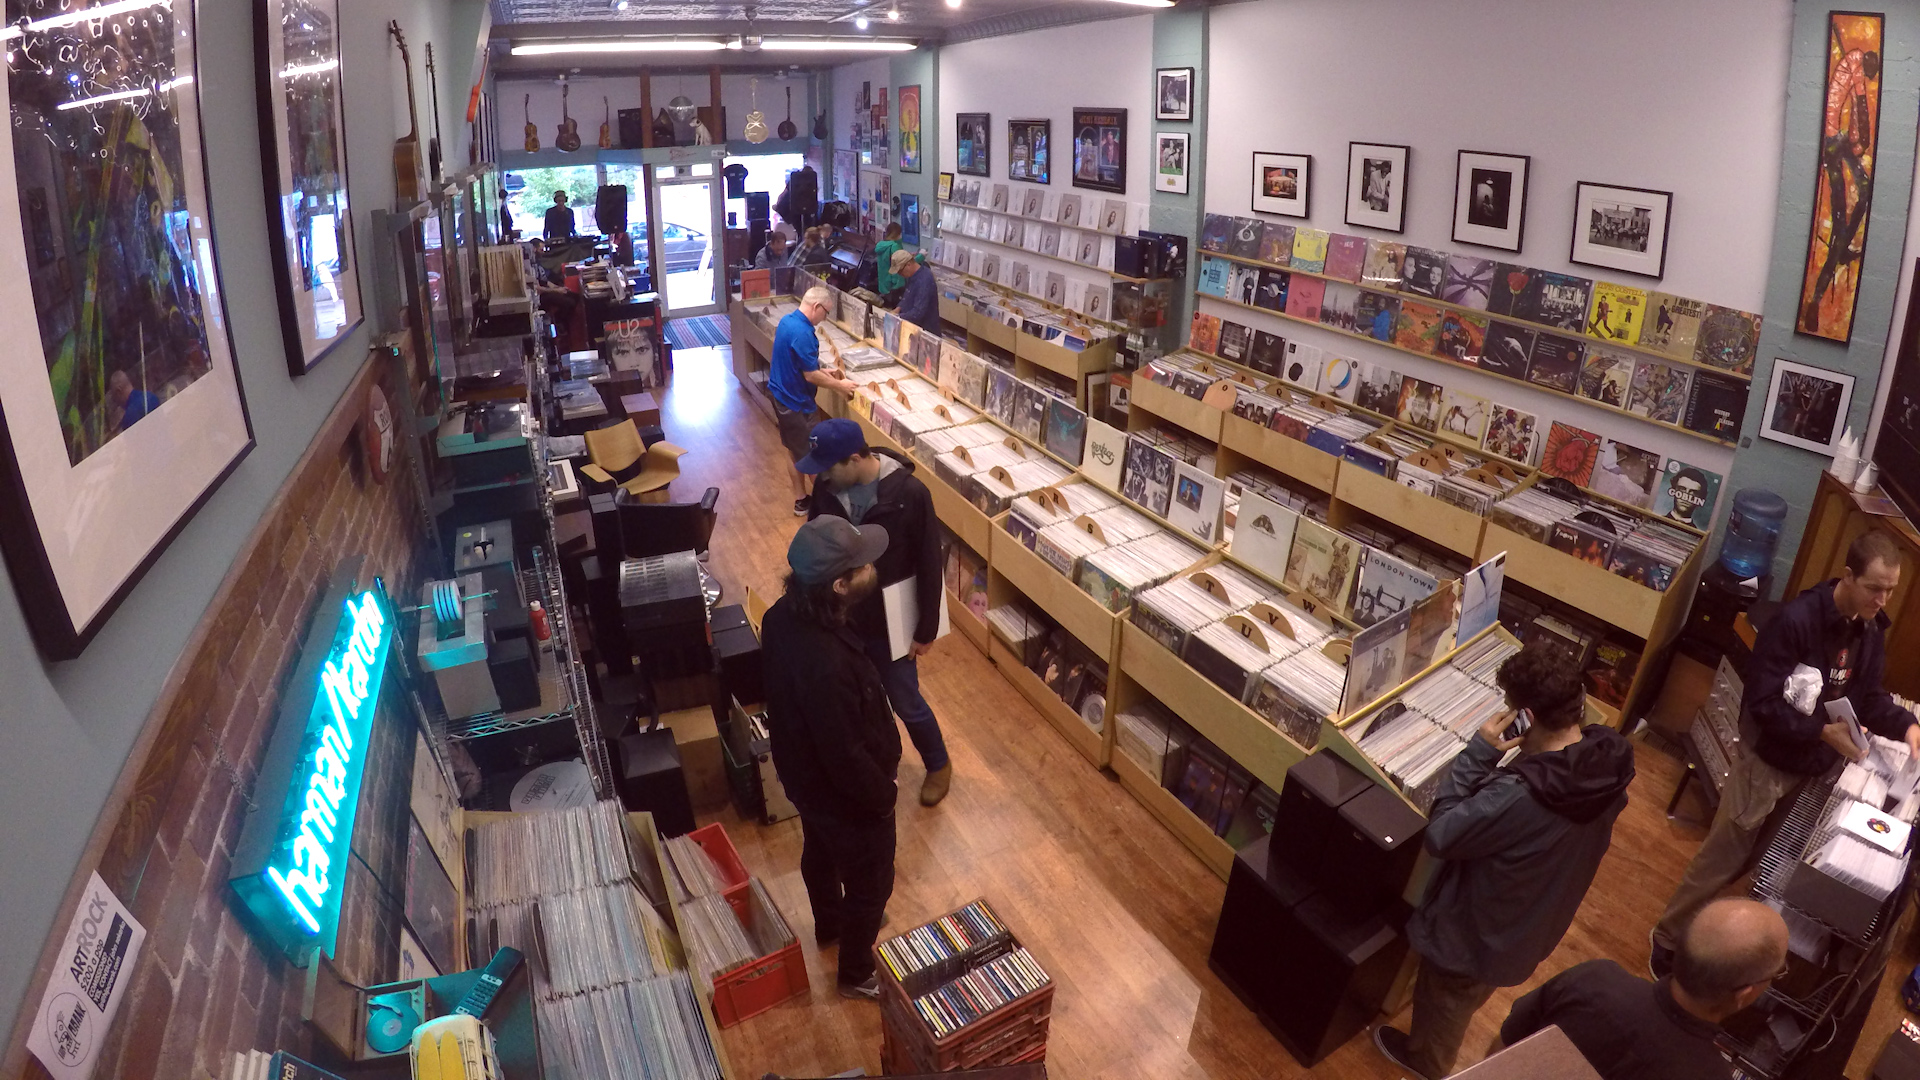 A photo taken from the ceiling camera of a record store. People are browsing